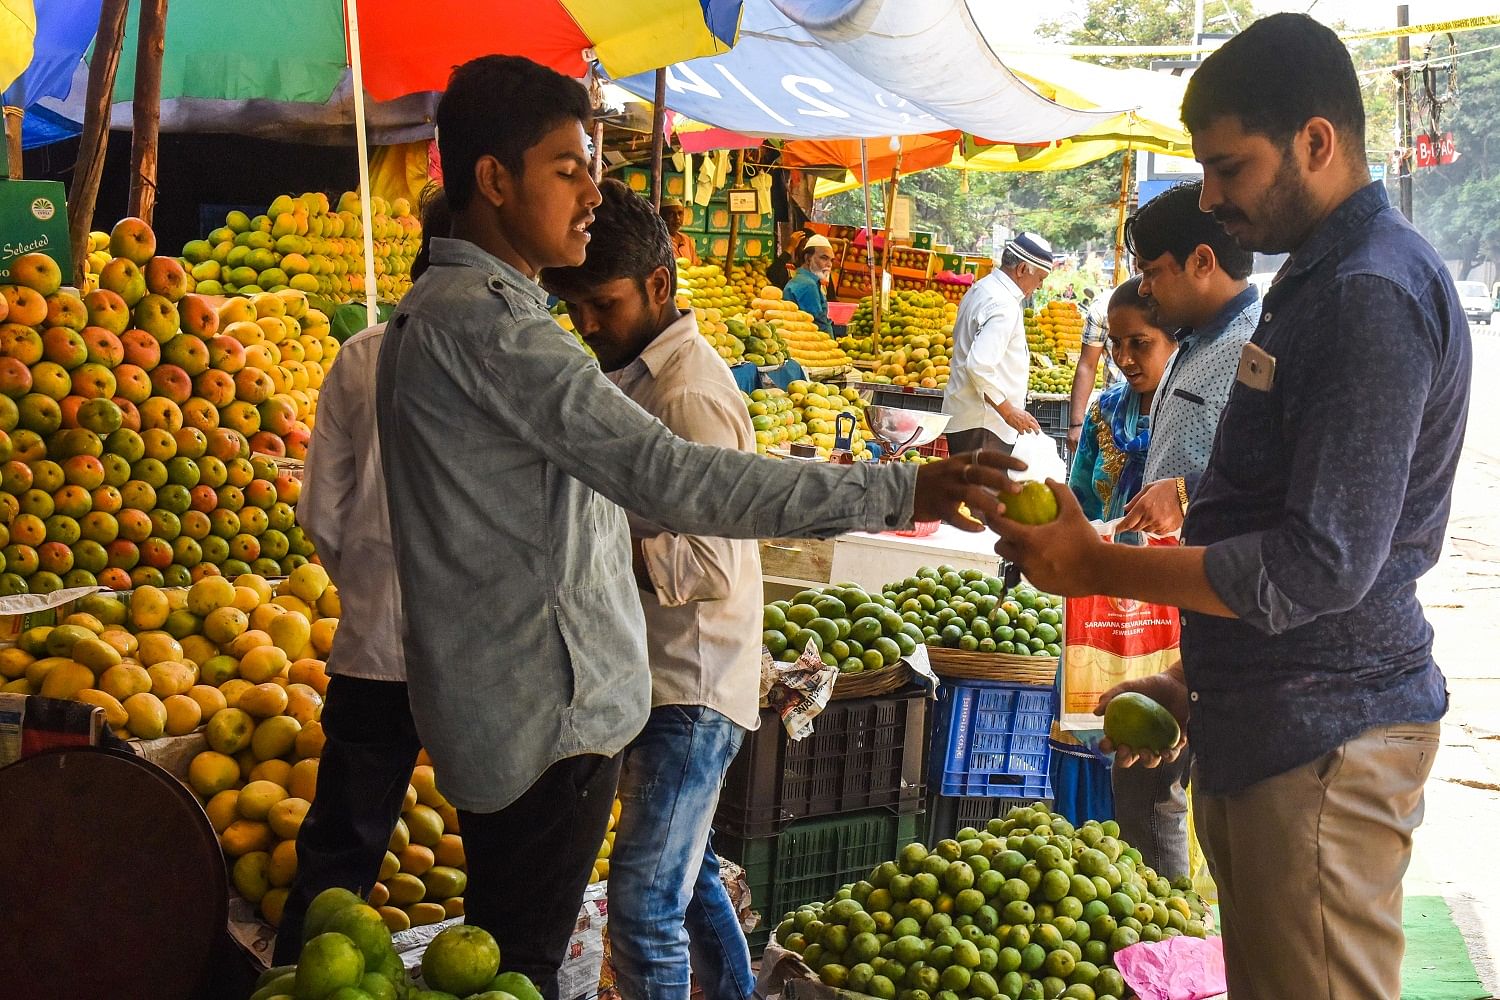 Mango prices have come down towards the end of the season.